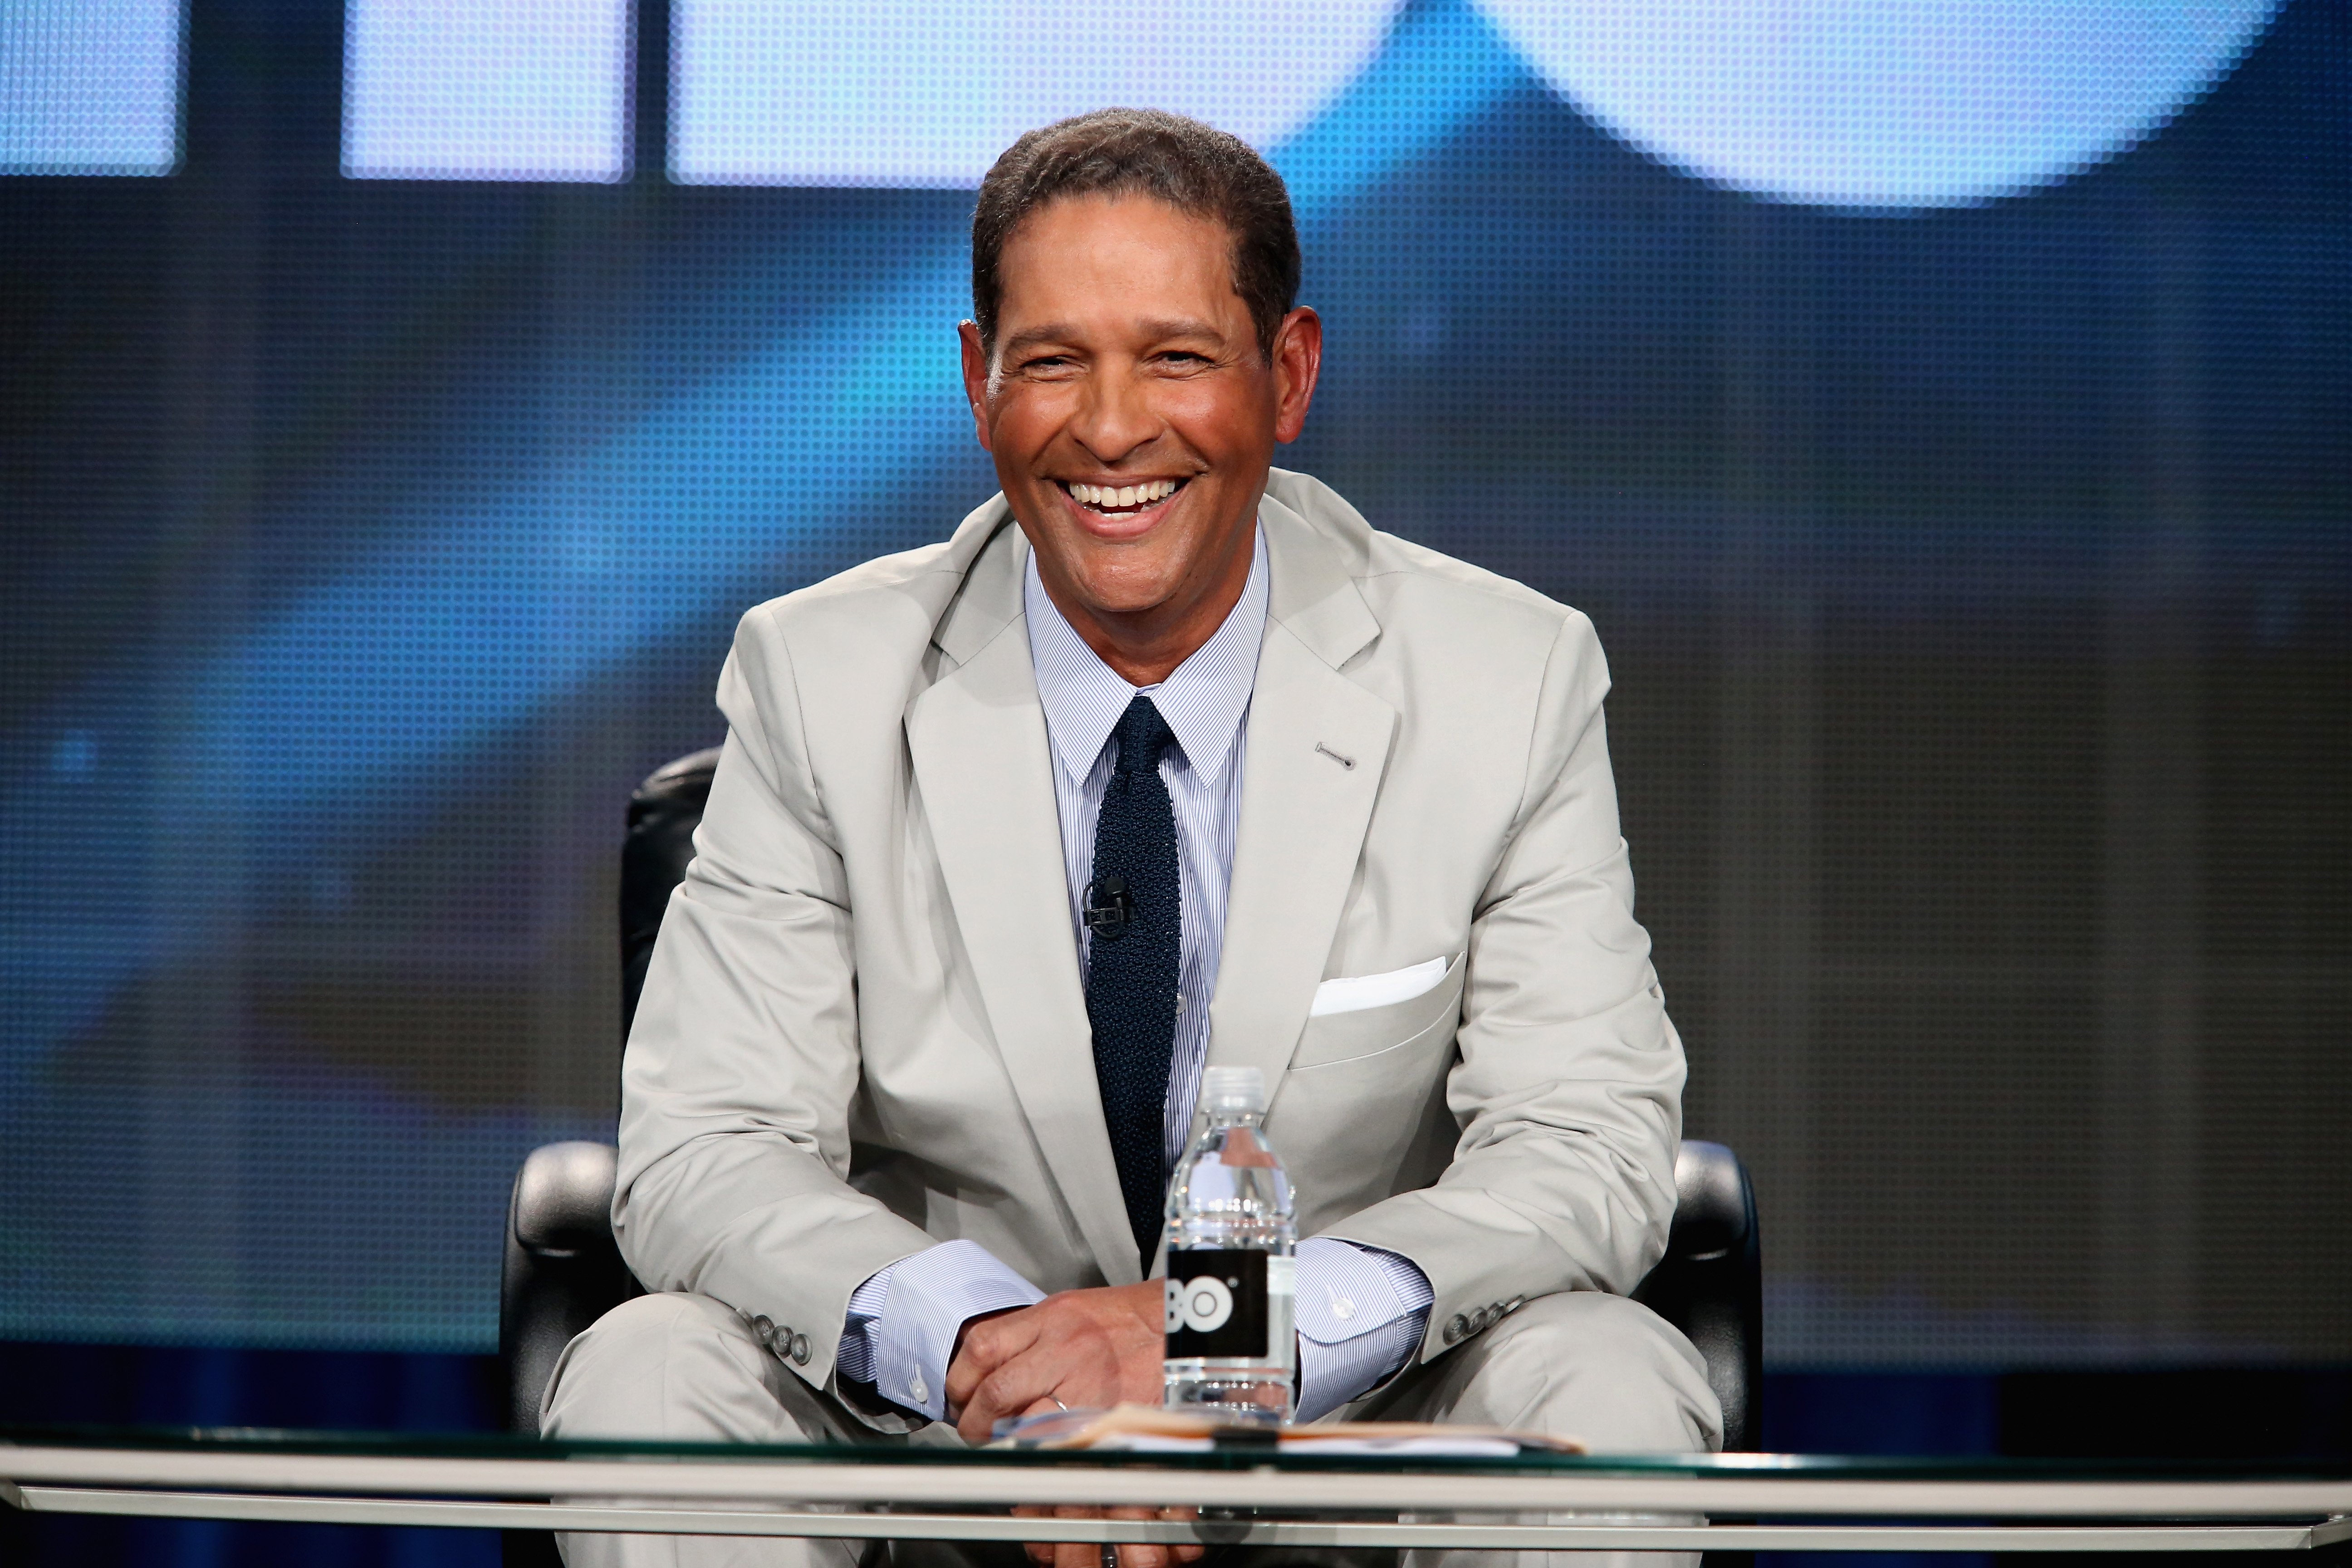 Bryant Gumbel's Daughter Jillian Beth Is All GrownUp and Has a